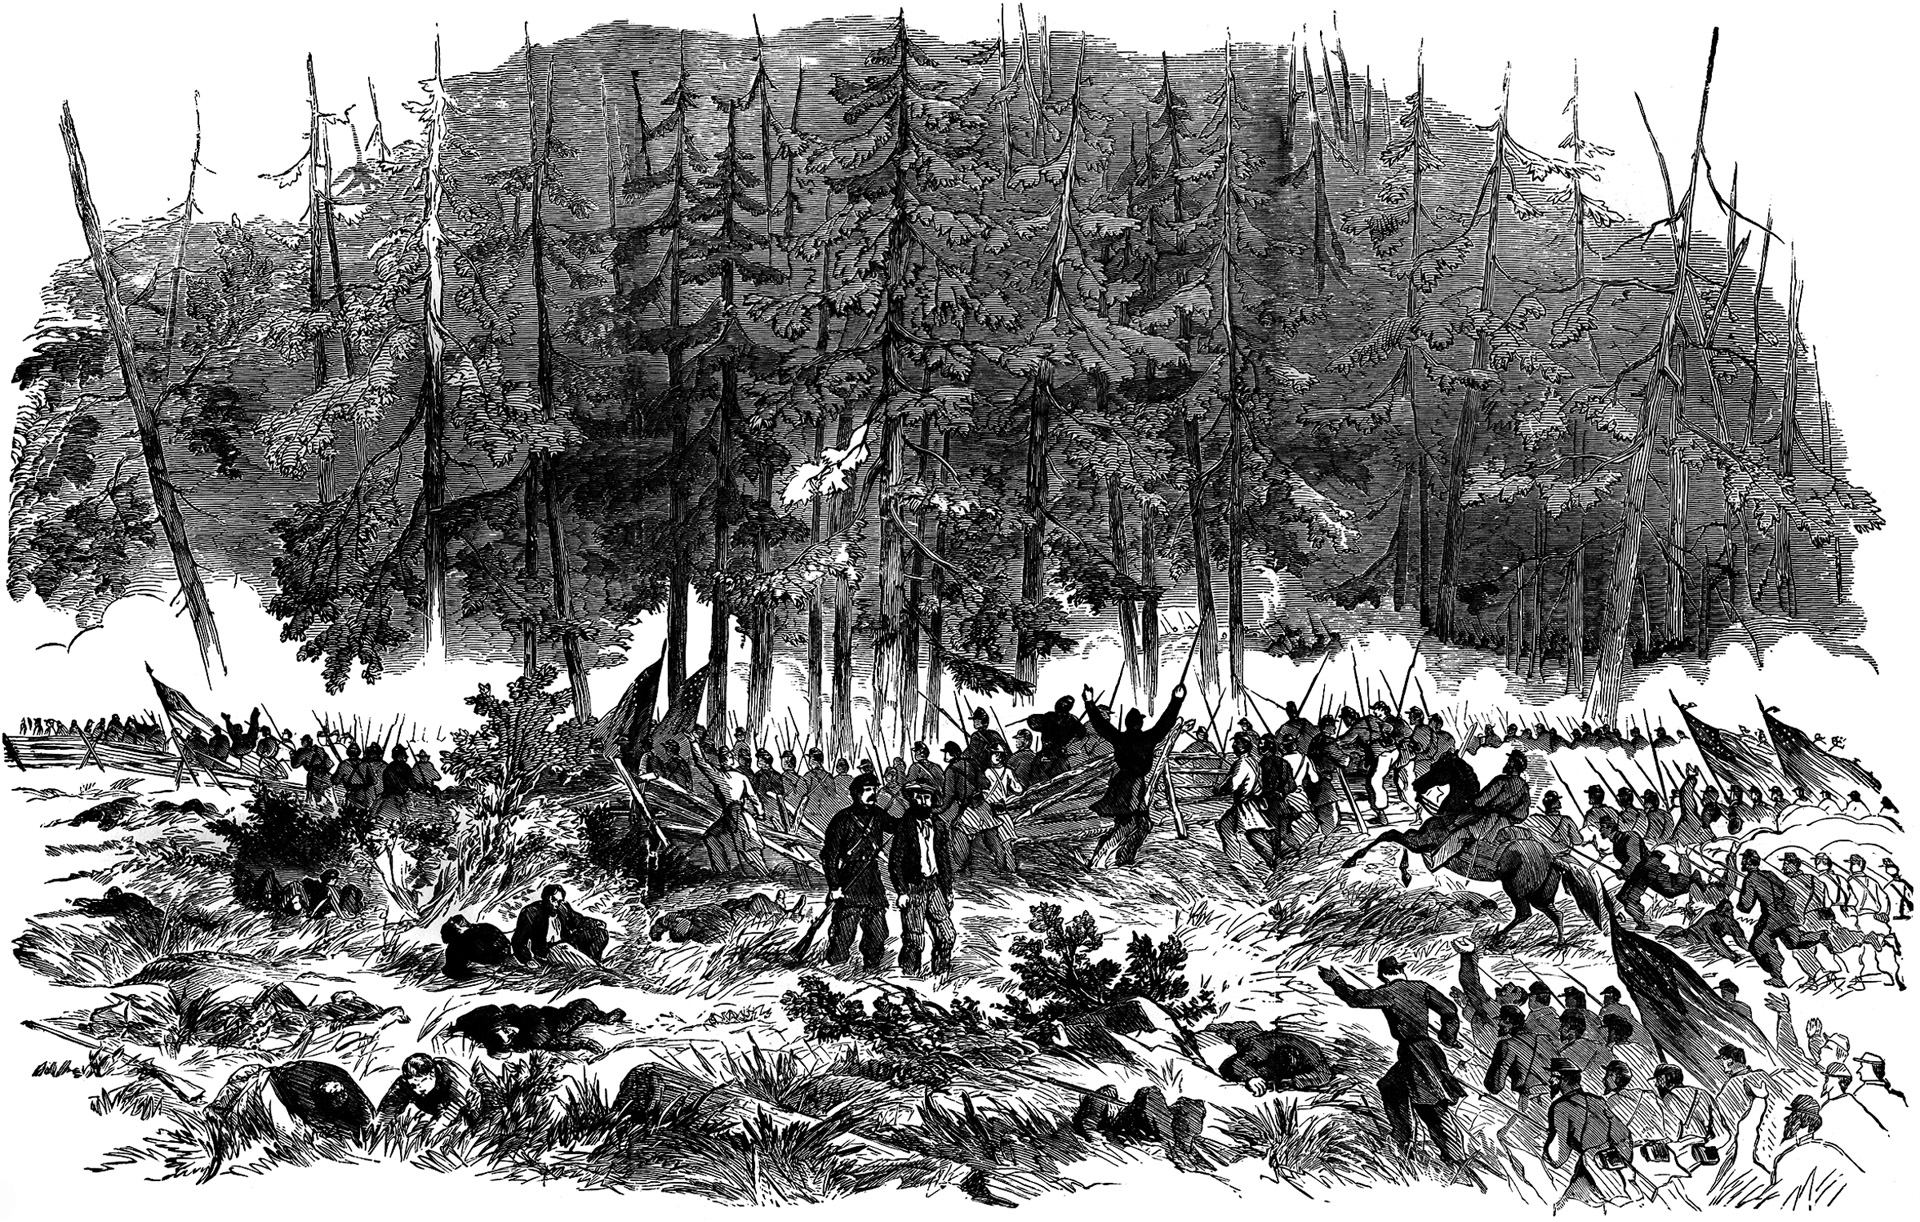 The soldiers of Crawford's brigade advanced stealthily through the woods against the Confederate line and then charged the enemy at the double-quick. As the Union troops exploited their success, some Confederate units took fire from three sides at once.